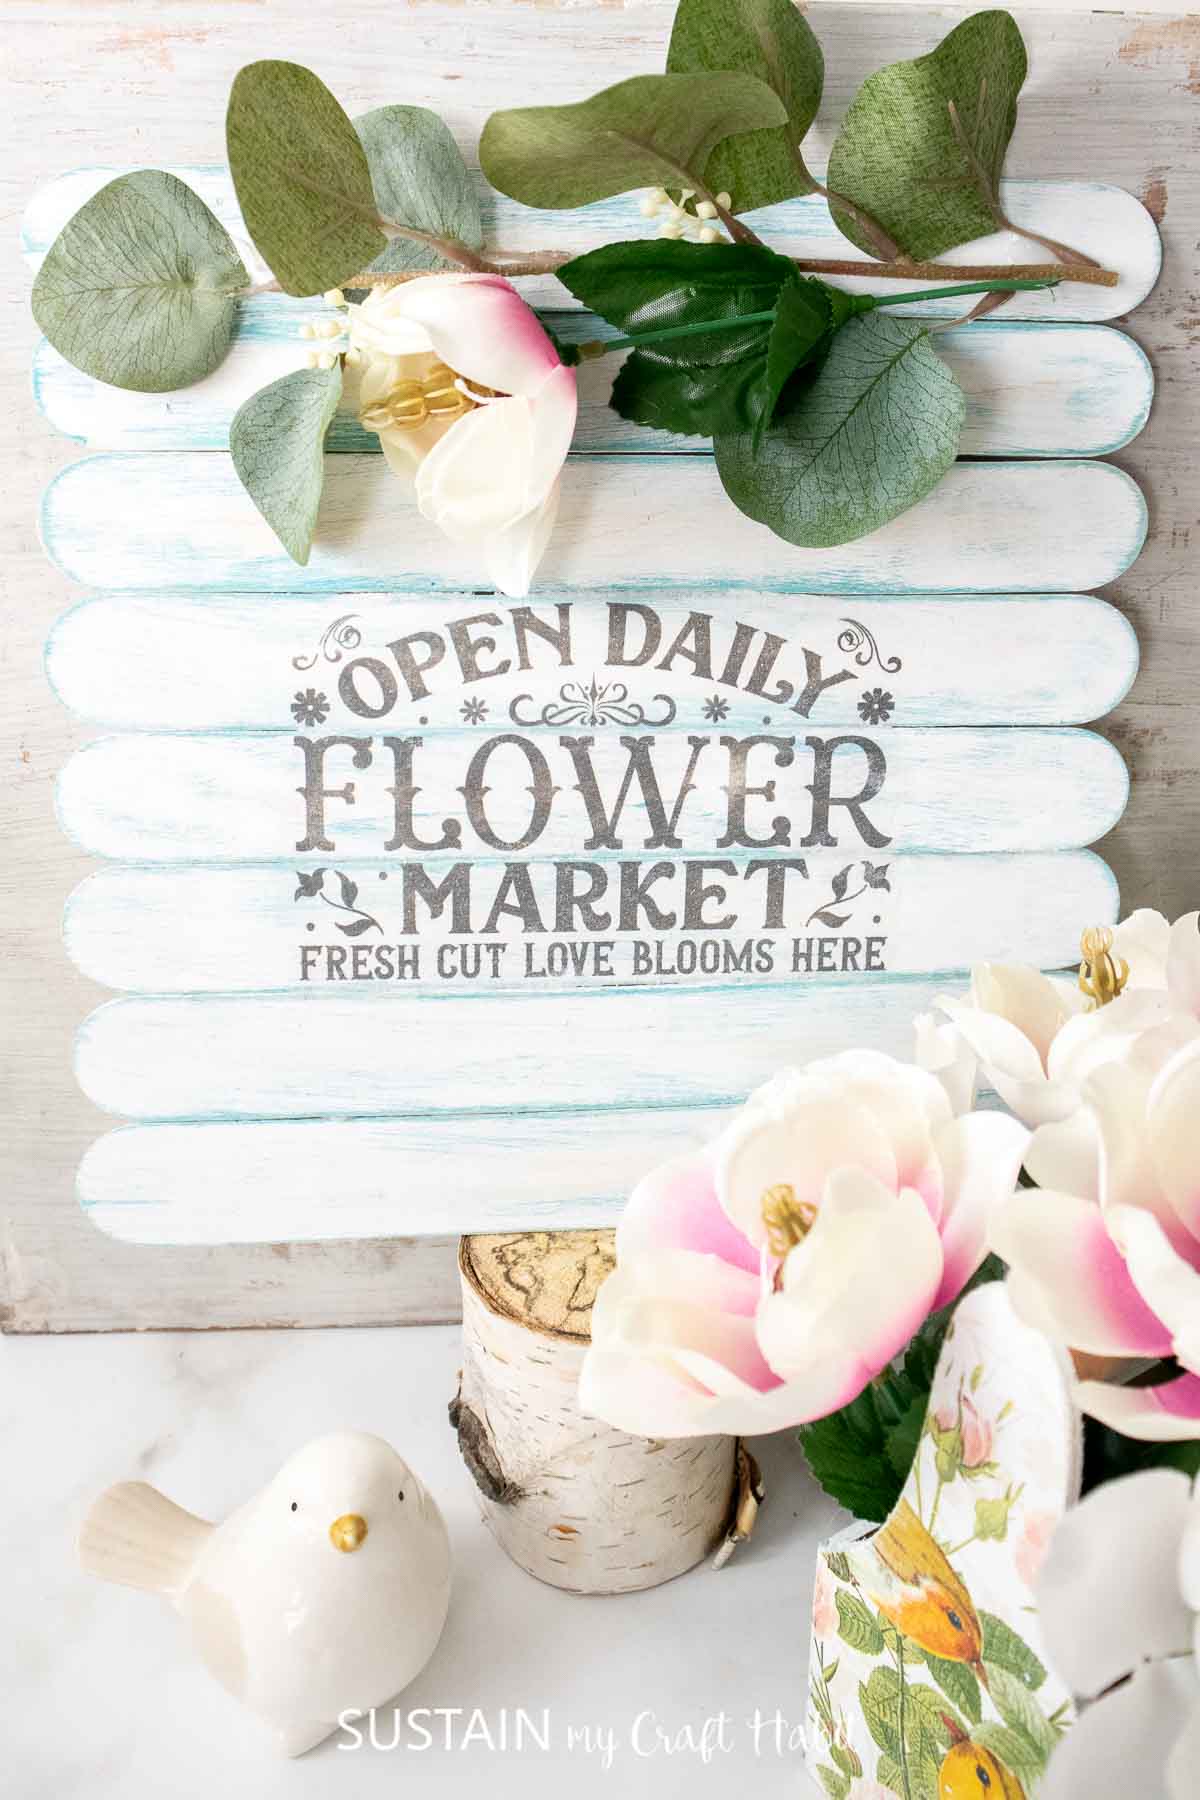 Jumbo craft stick sign decorated with a printed image and faux flowers.